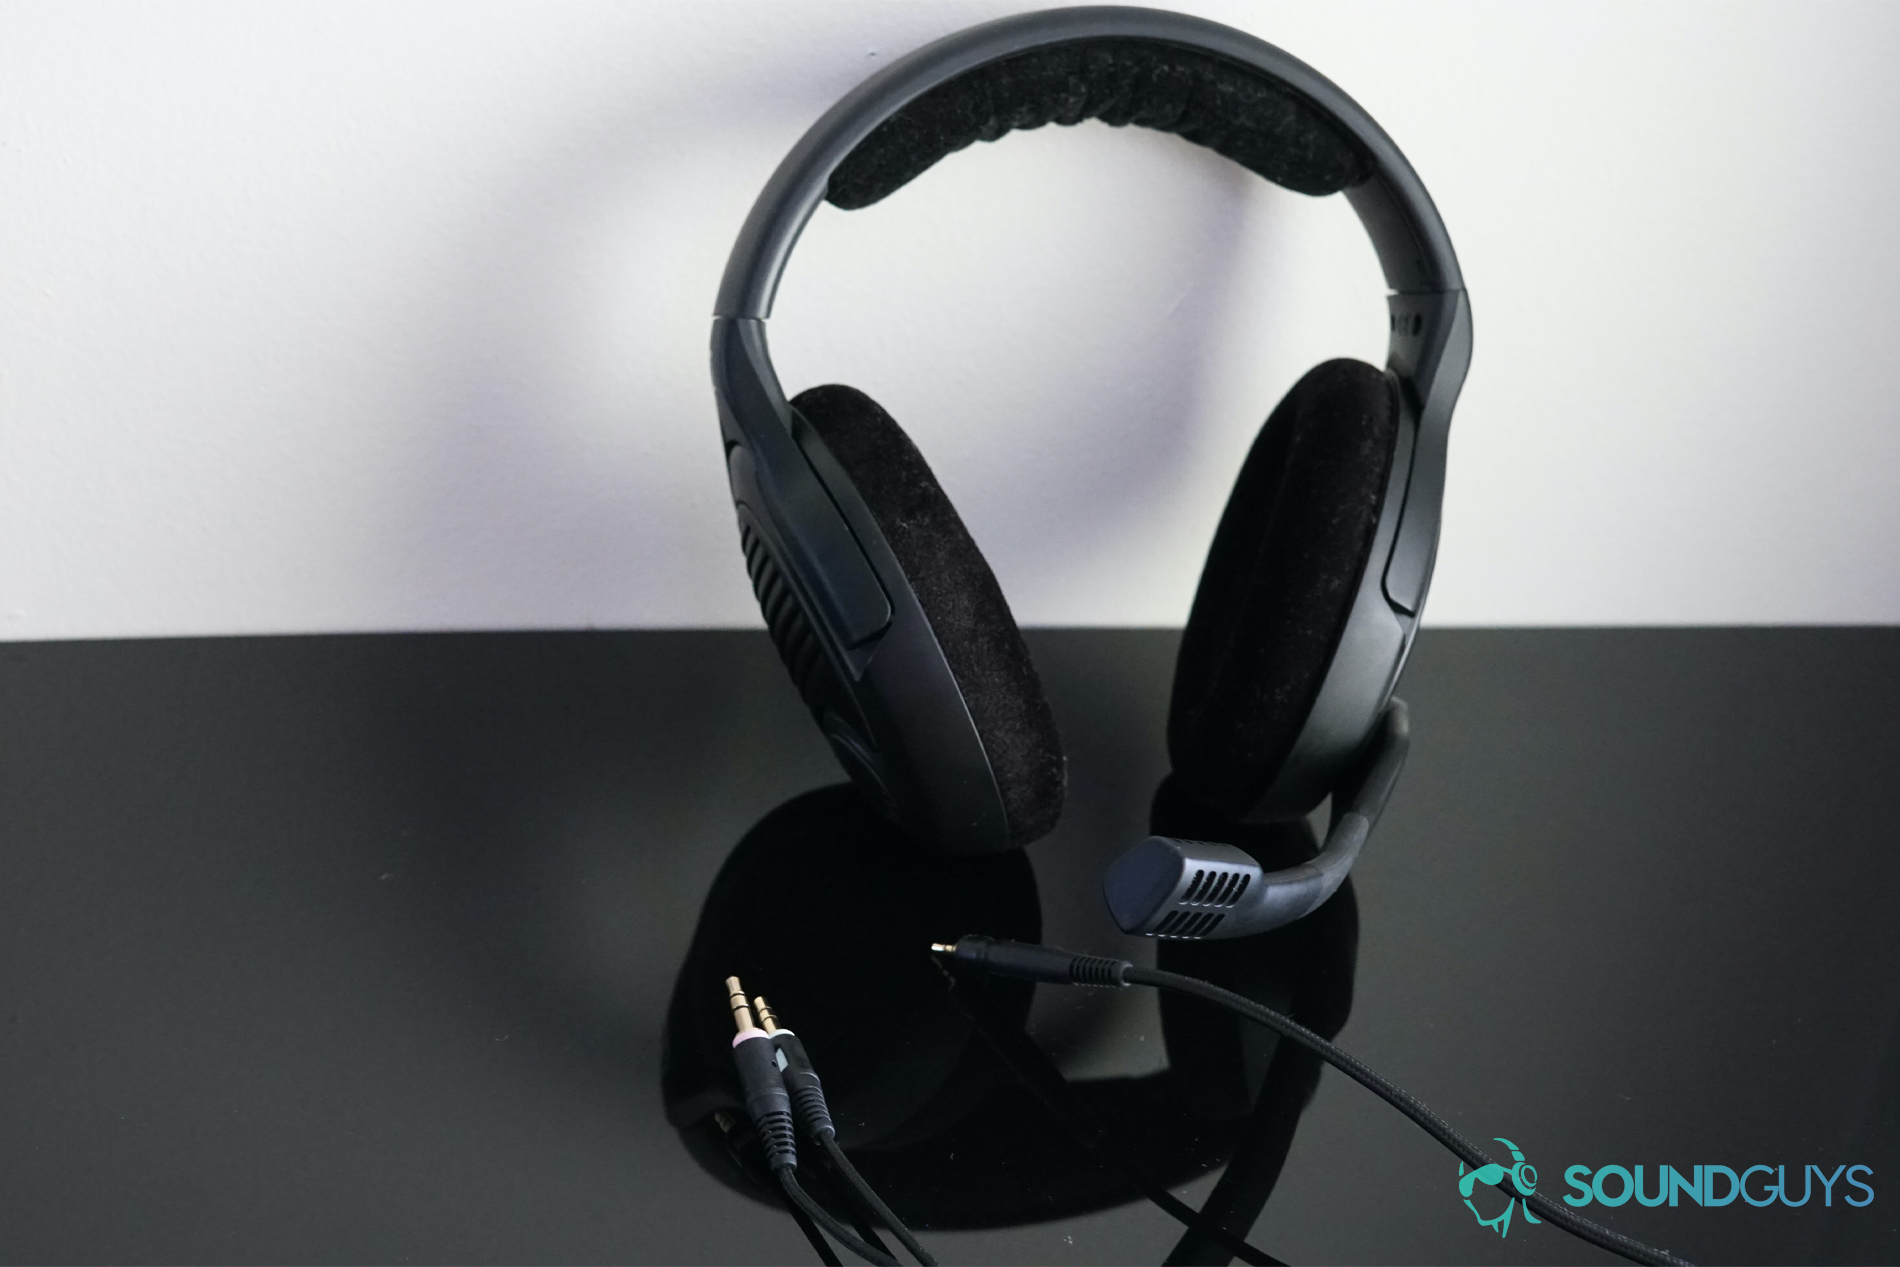 A picture of the Sennheiser PC37X leaned against a white wall on a reflective black surface with its detached audio cord in front of it.